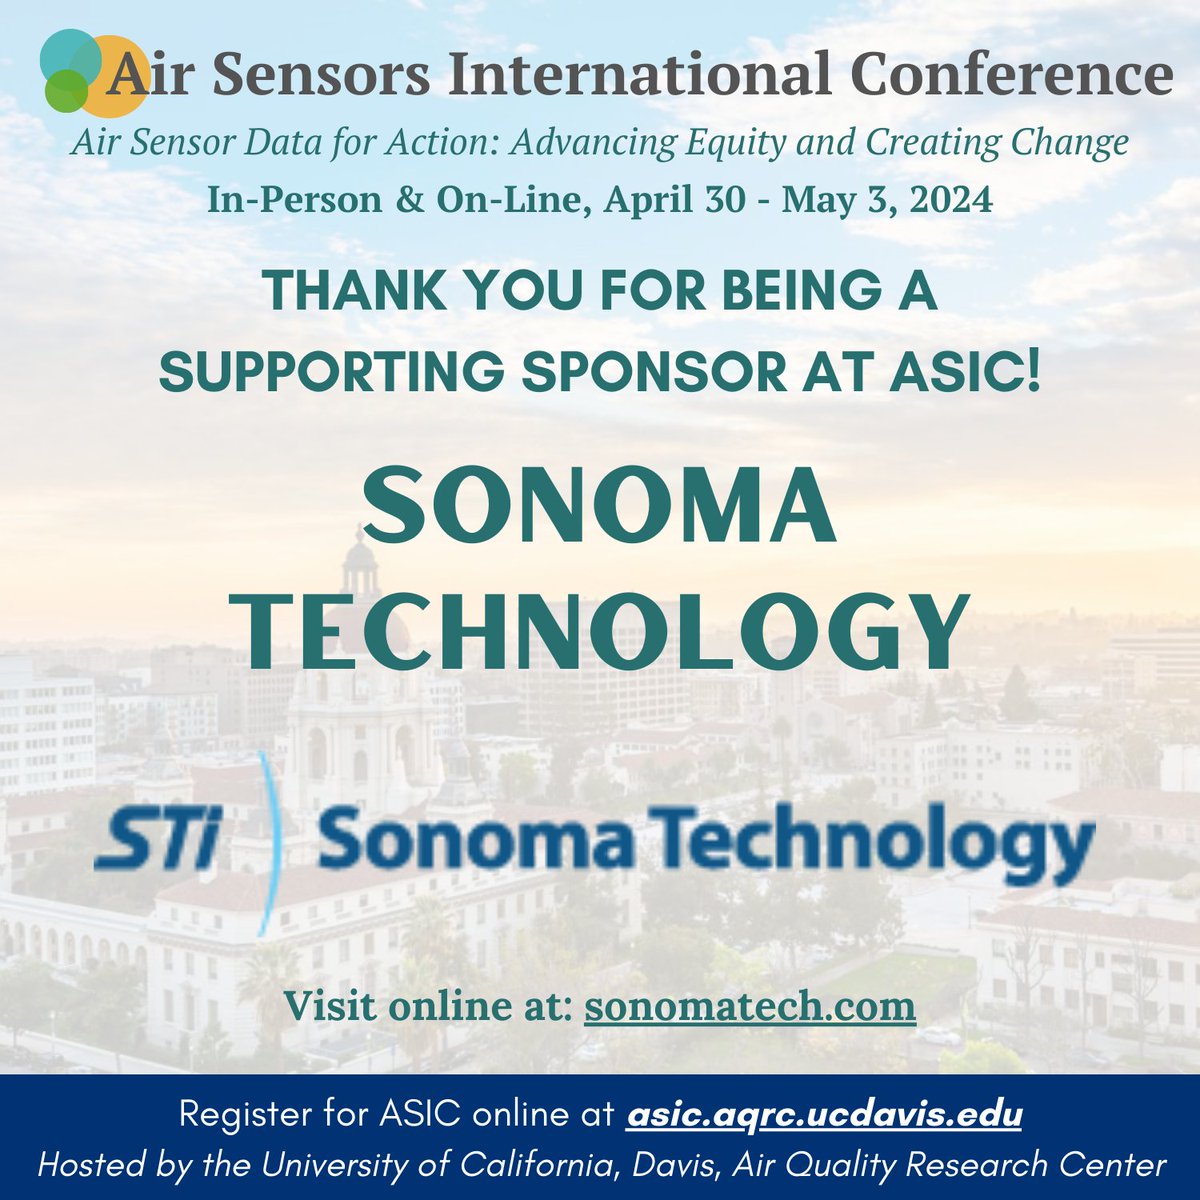 Thank you again to Sonoma Technology for being a supporting sponsor at ASIC California 2024! Learn more about Sonoma Technology at sonomatech.com #sonomatech #ASIC2024 #airquality #airsensors #lowcostsensors